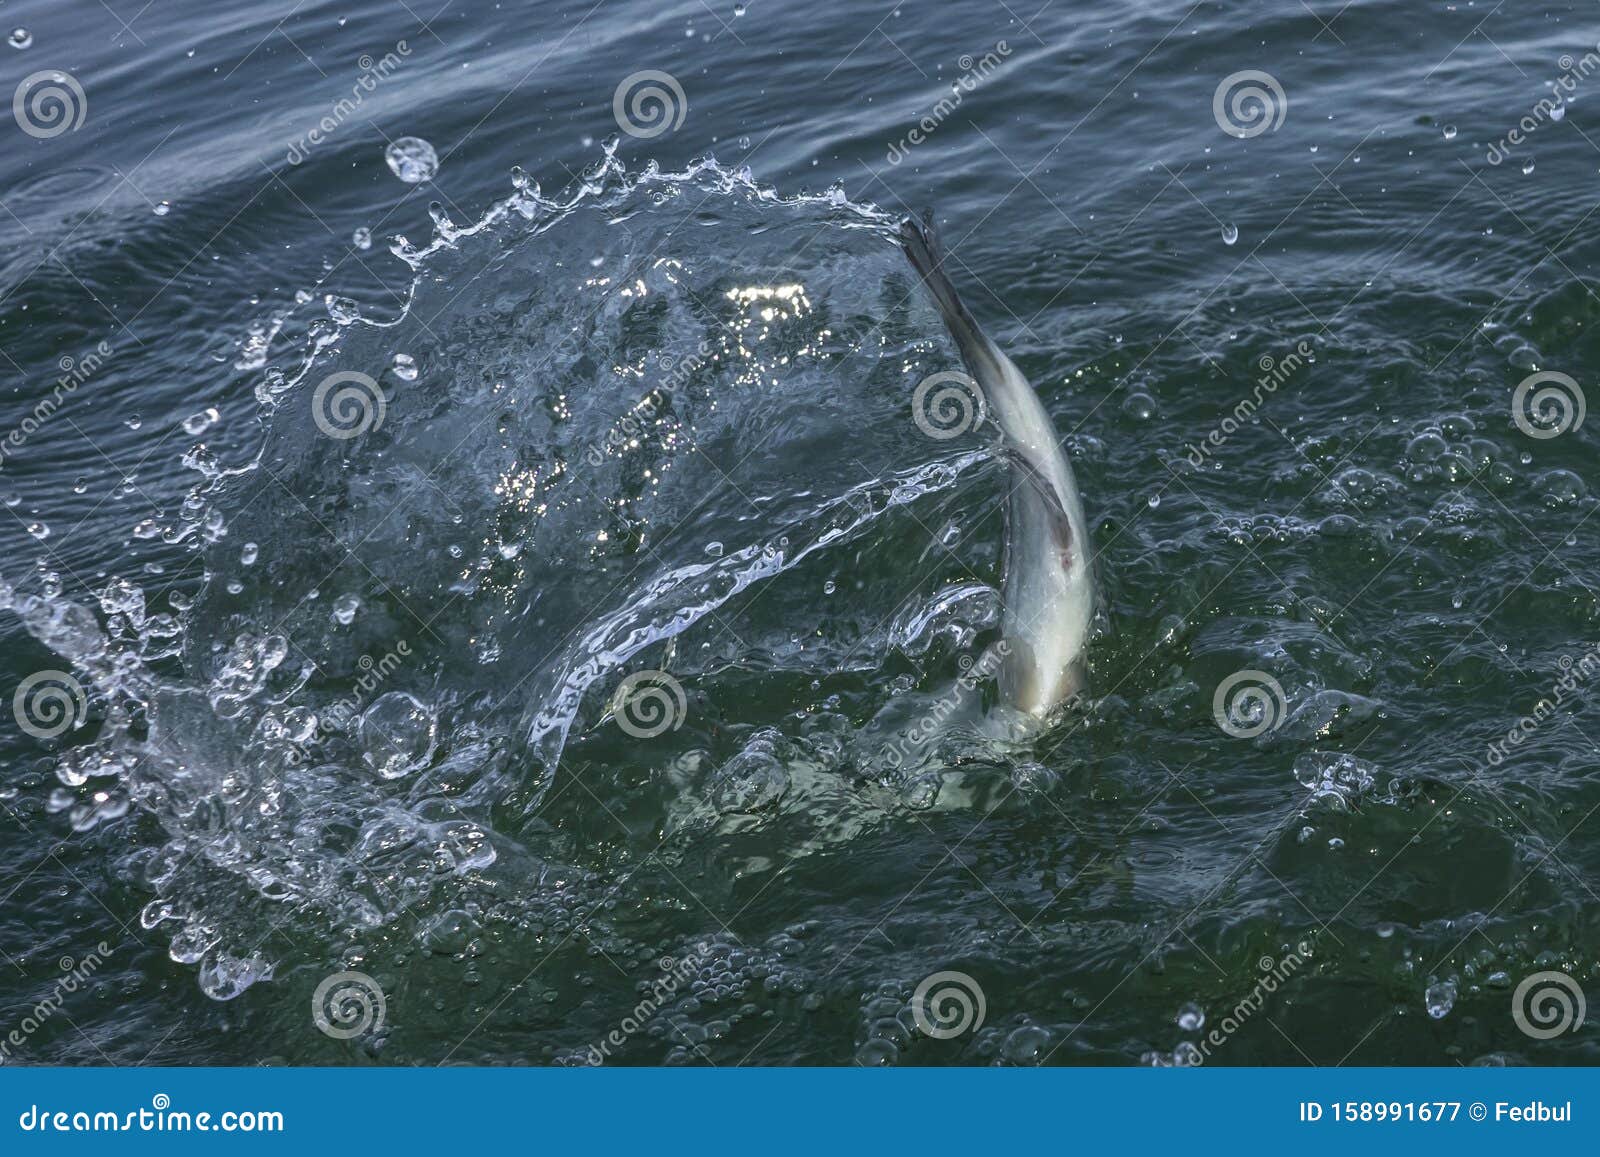 Fishtail with Splashing after Jumping Fish in Water. Area Trout